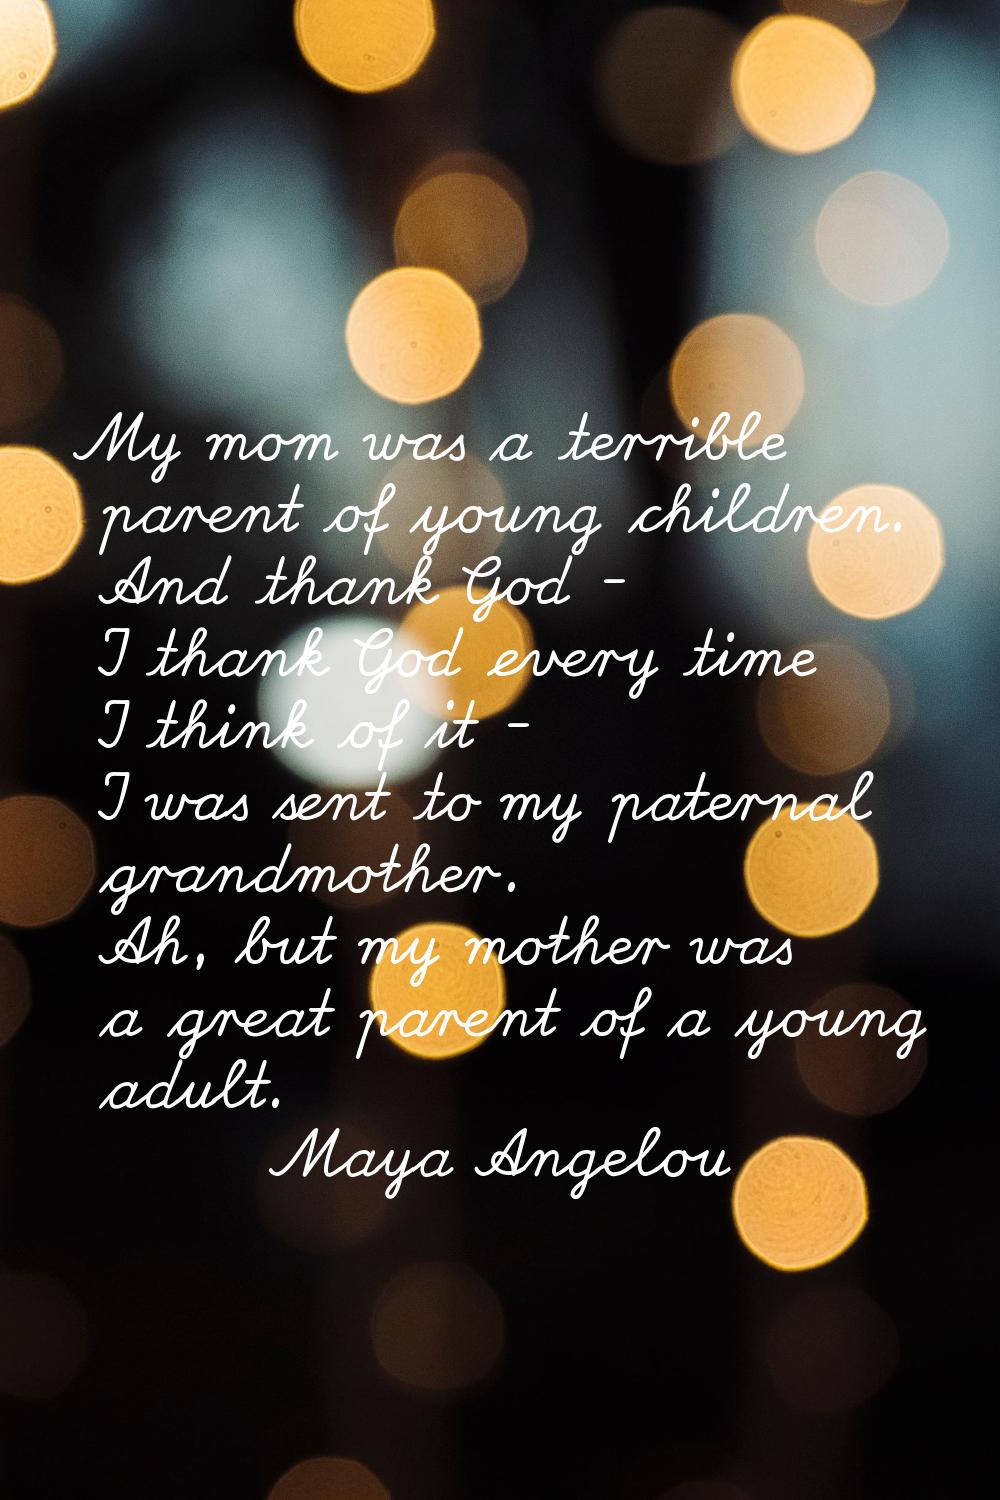 My mom was a terrible parent of young children. And thank God - I thank God every time I think of i